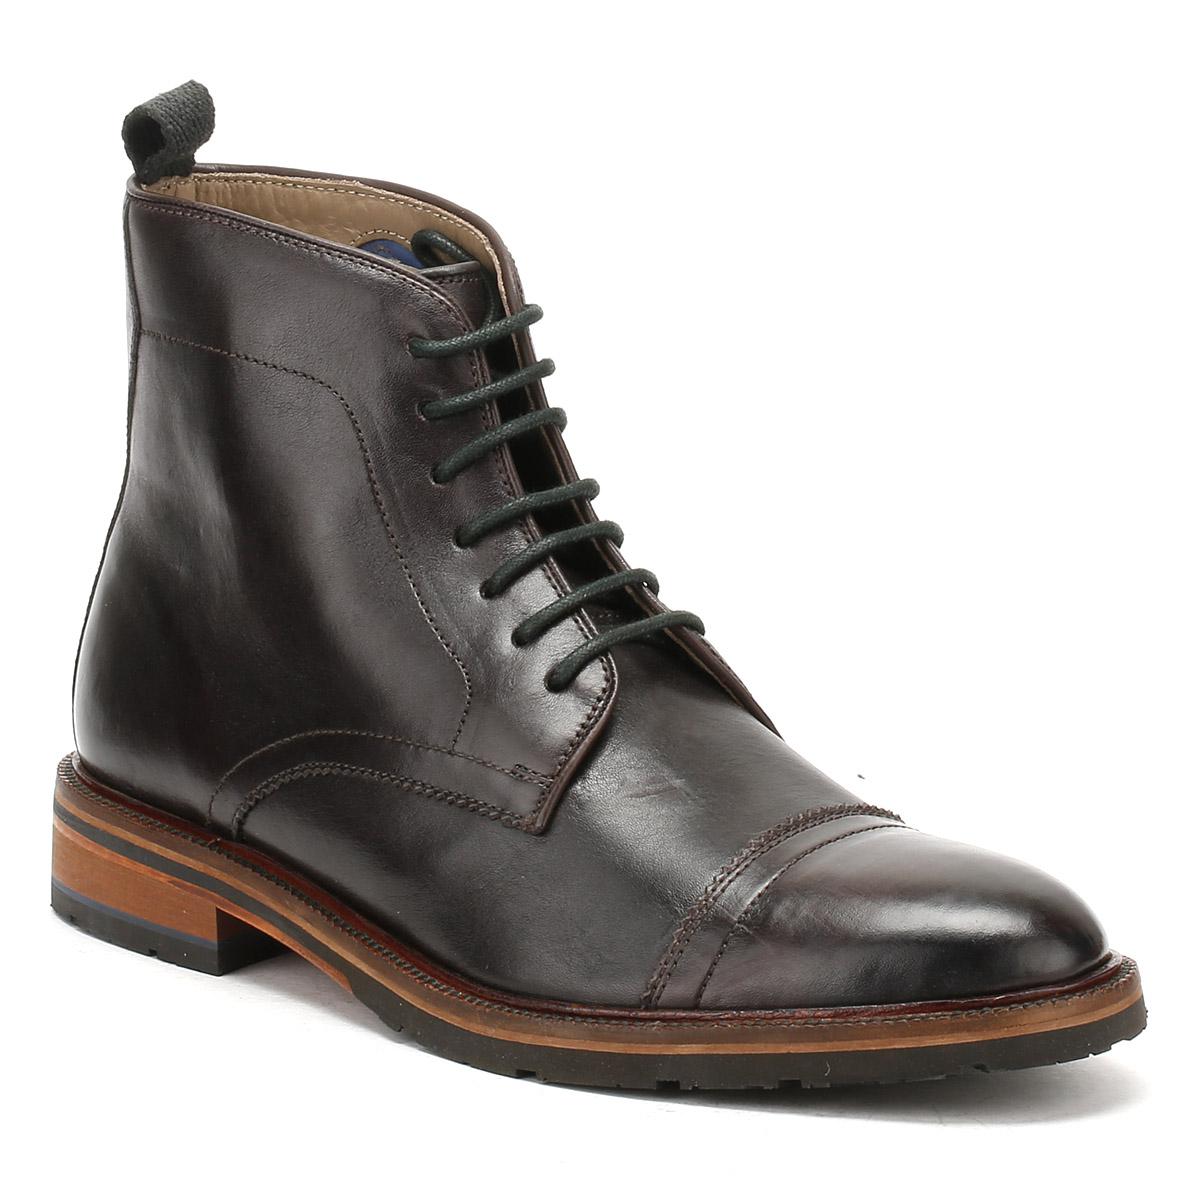 Lyst - Oliver Sweeney Mens Brown Boxgrove Boots in Brown for Men